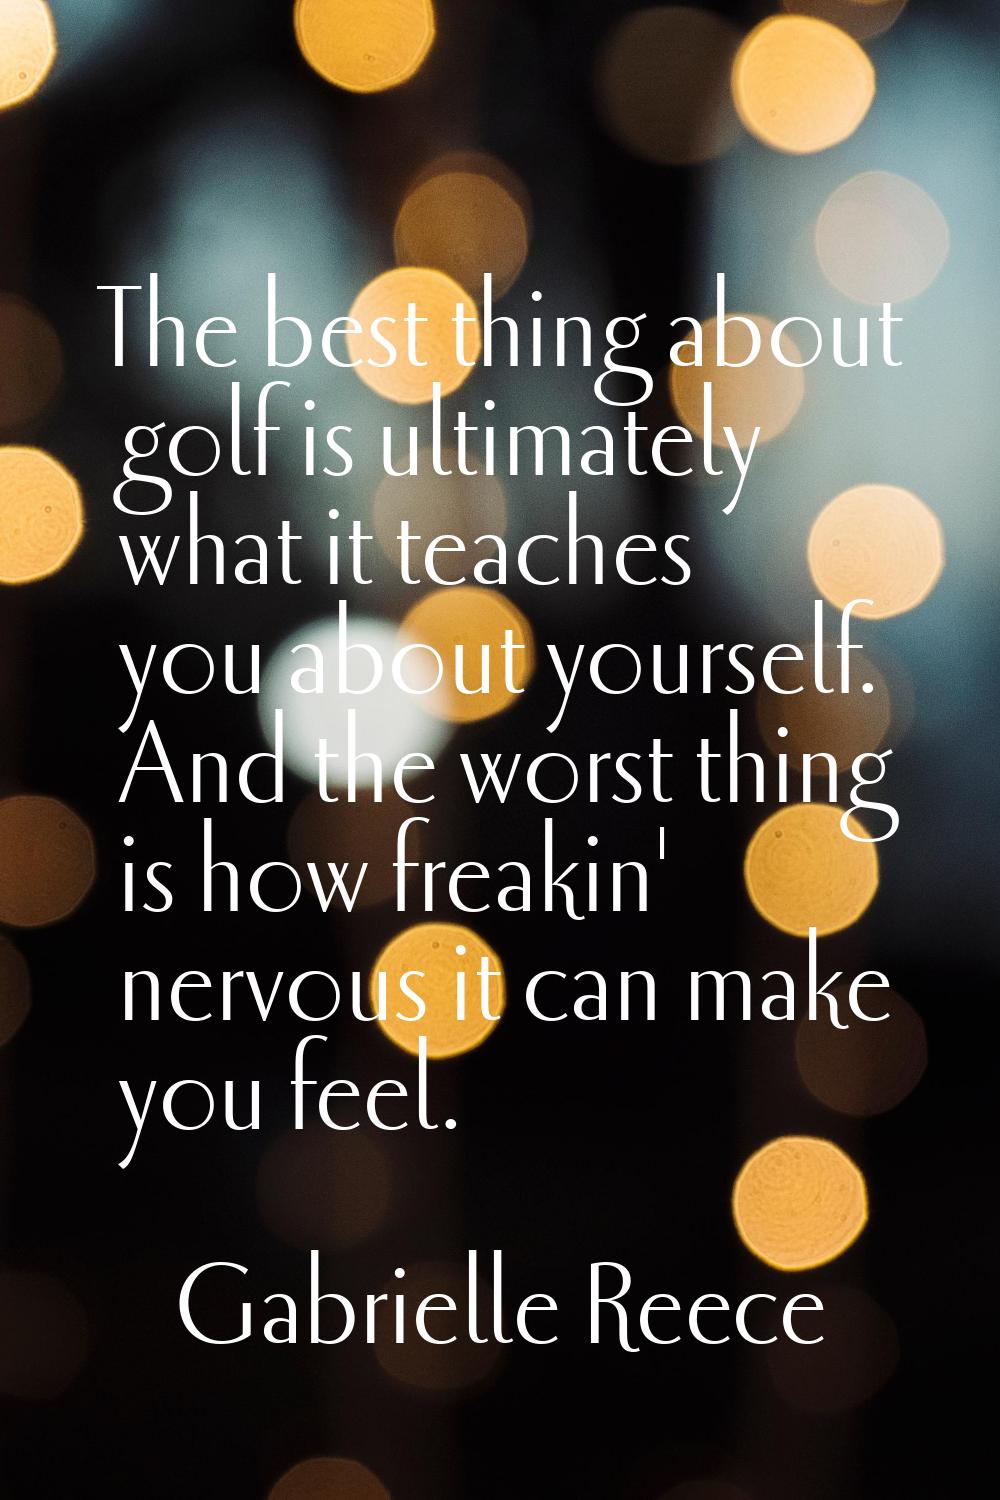 The best thing about golf is ultimately what it teaches you about yourself. And the worst thing is 